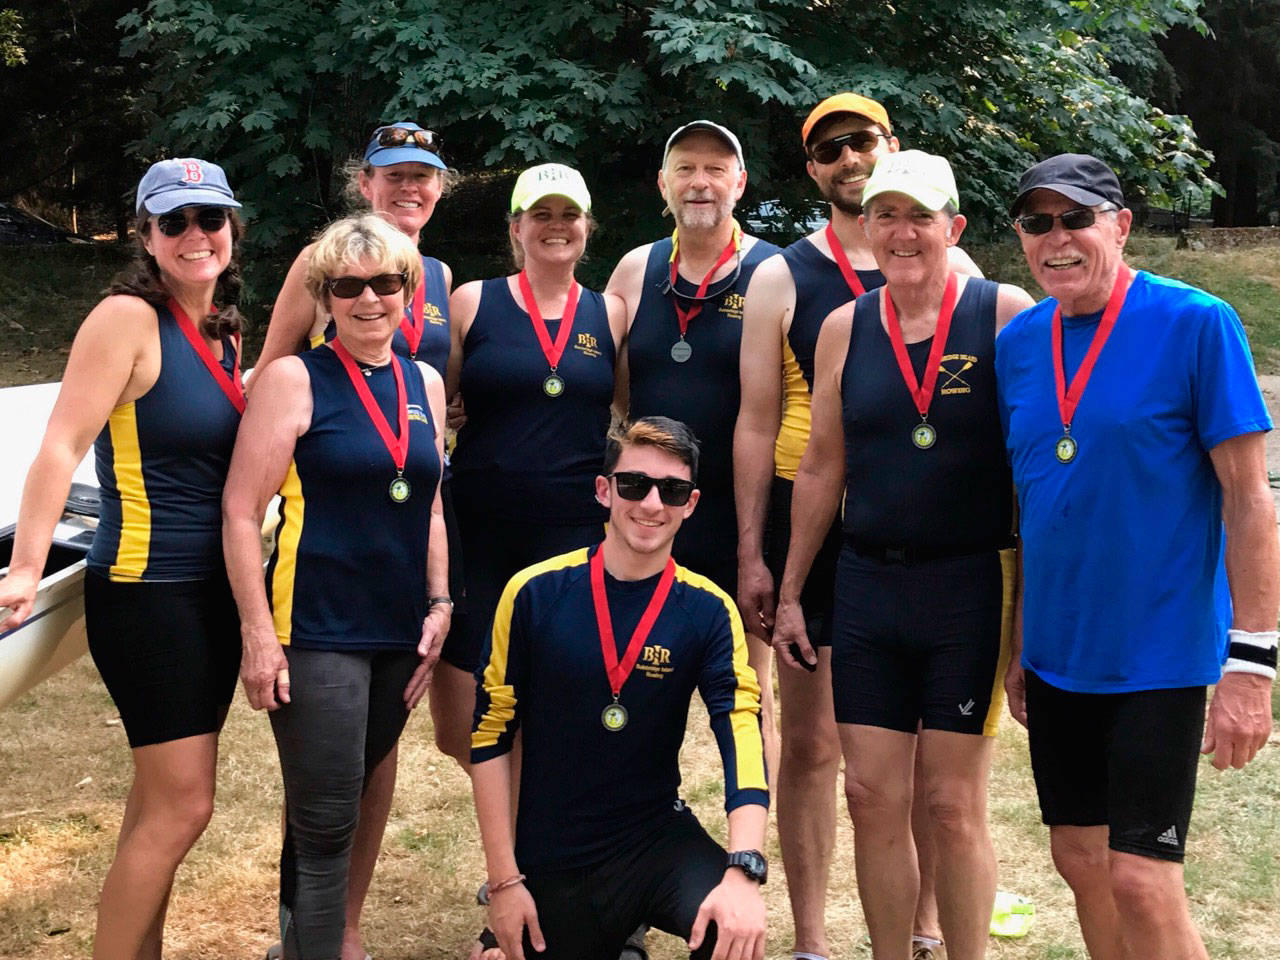 Photo courtesy of Patrick Batson | The Bainbridge Island Rowing Mixed Masters 8 pose for a photo at the annual Summer Rowing Extravaganza at Green Lake in Seattle earlier this month.                                 Photo courtesy of Patrick Batson | The Bainbridge Island Rowing Mixed Masters 8 pose for a photo at the annual Summer Rowing Extravaganza at Green Lake in Seattle earlier this month.